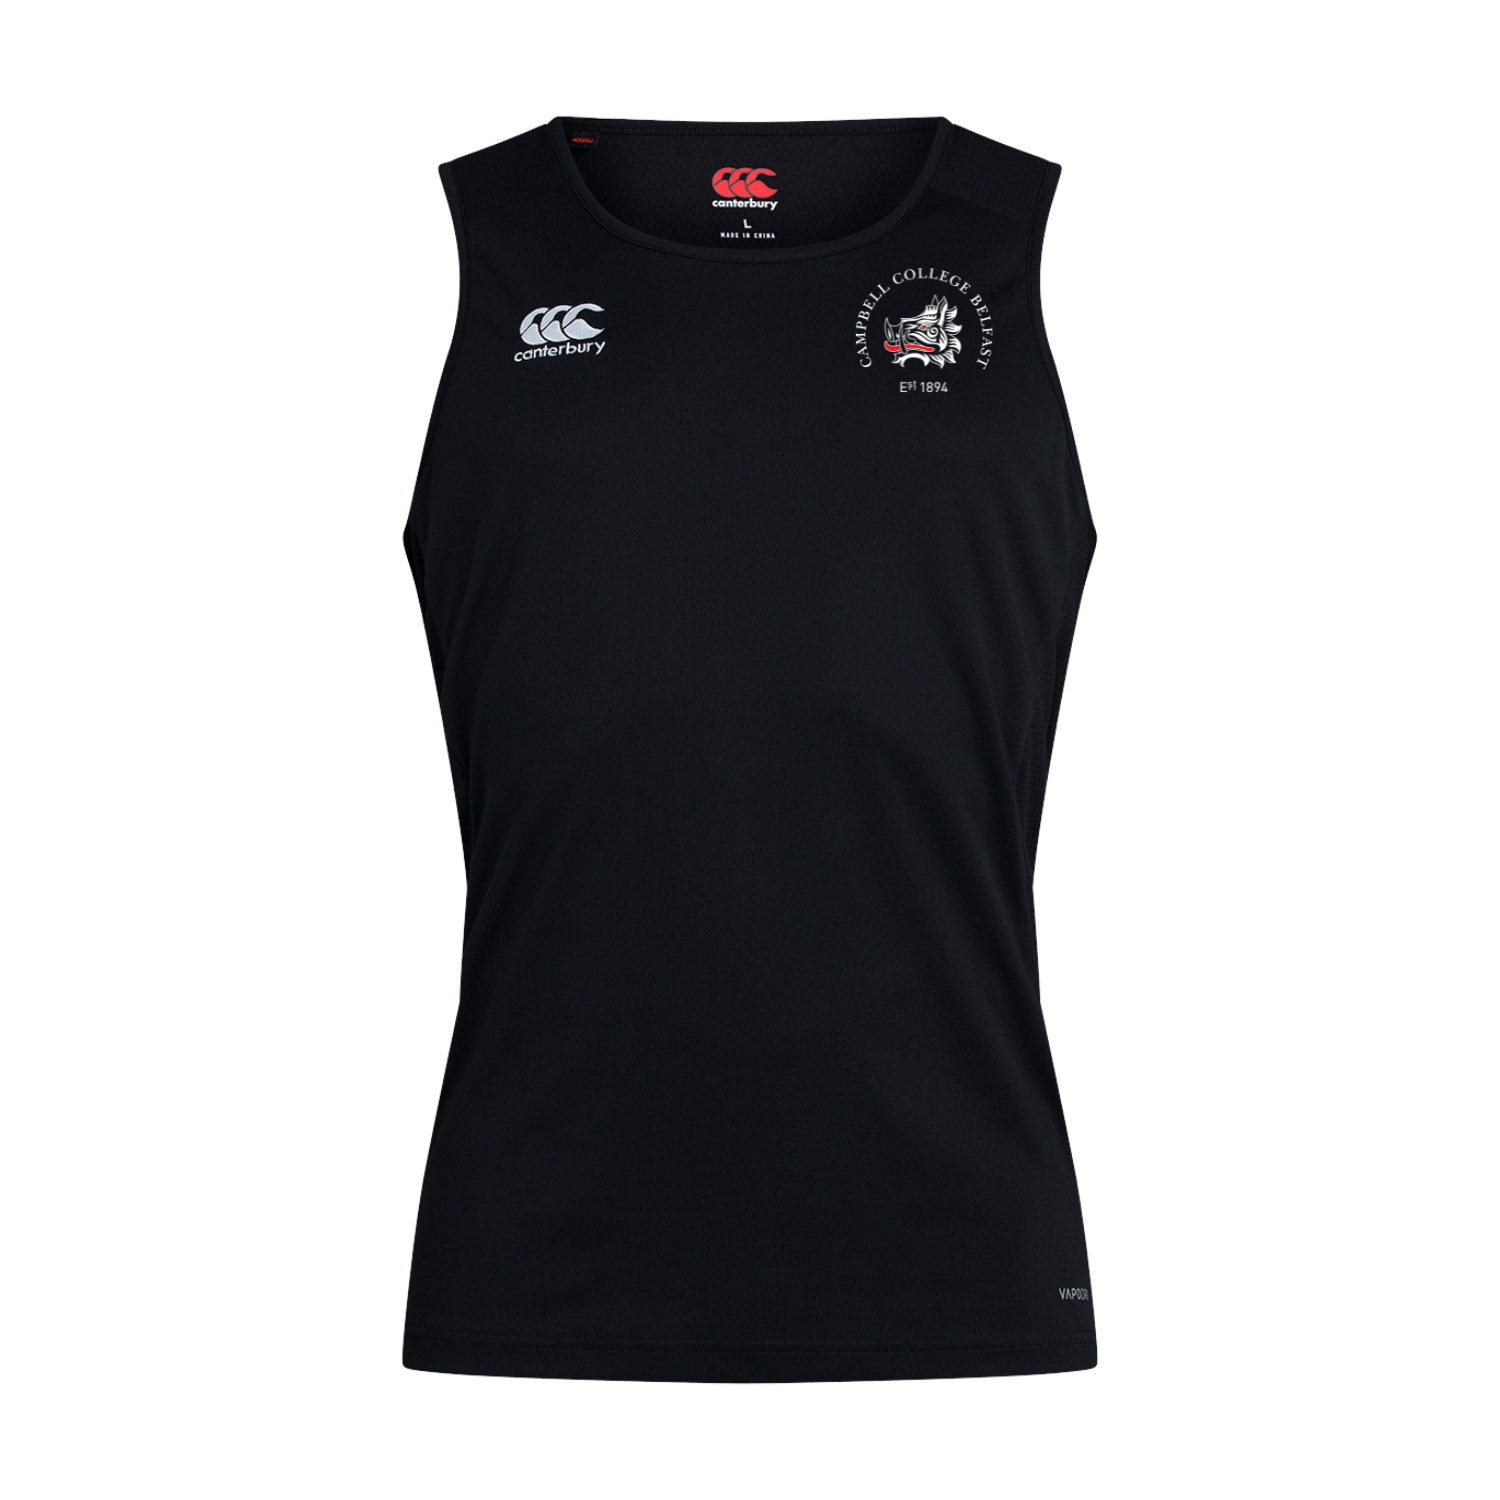 Campbell College - Club Dry Singlet - Black